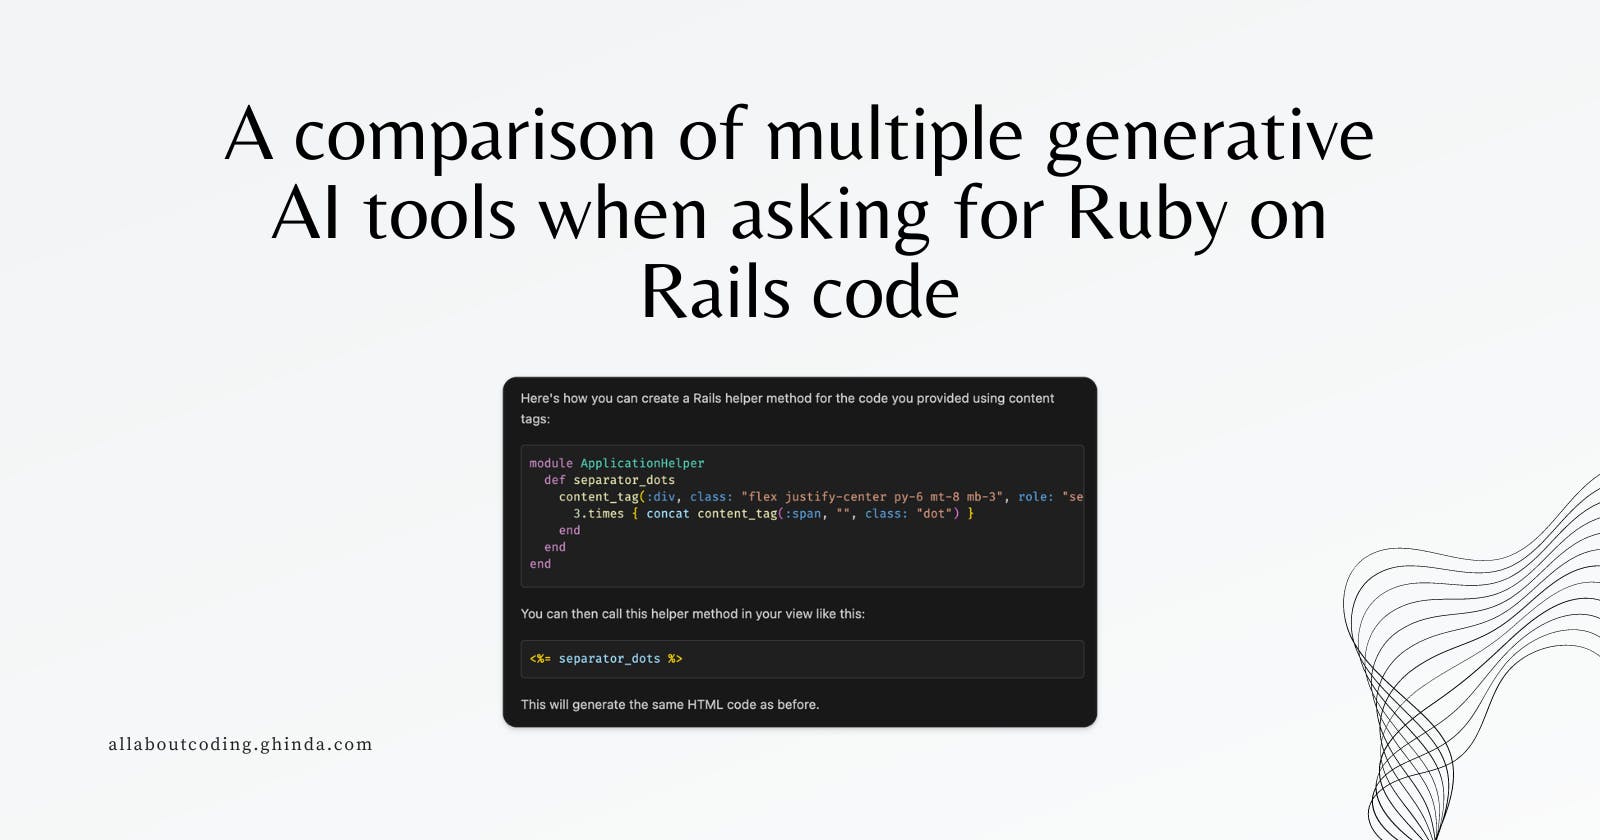 A comparison of multiple generative AI tools when asking for Ruby on Rails code